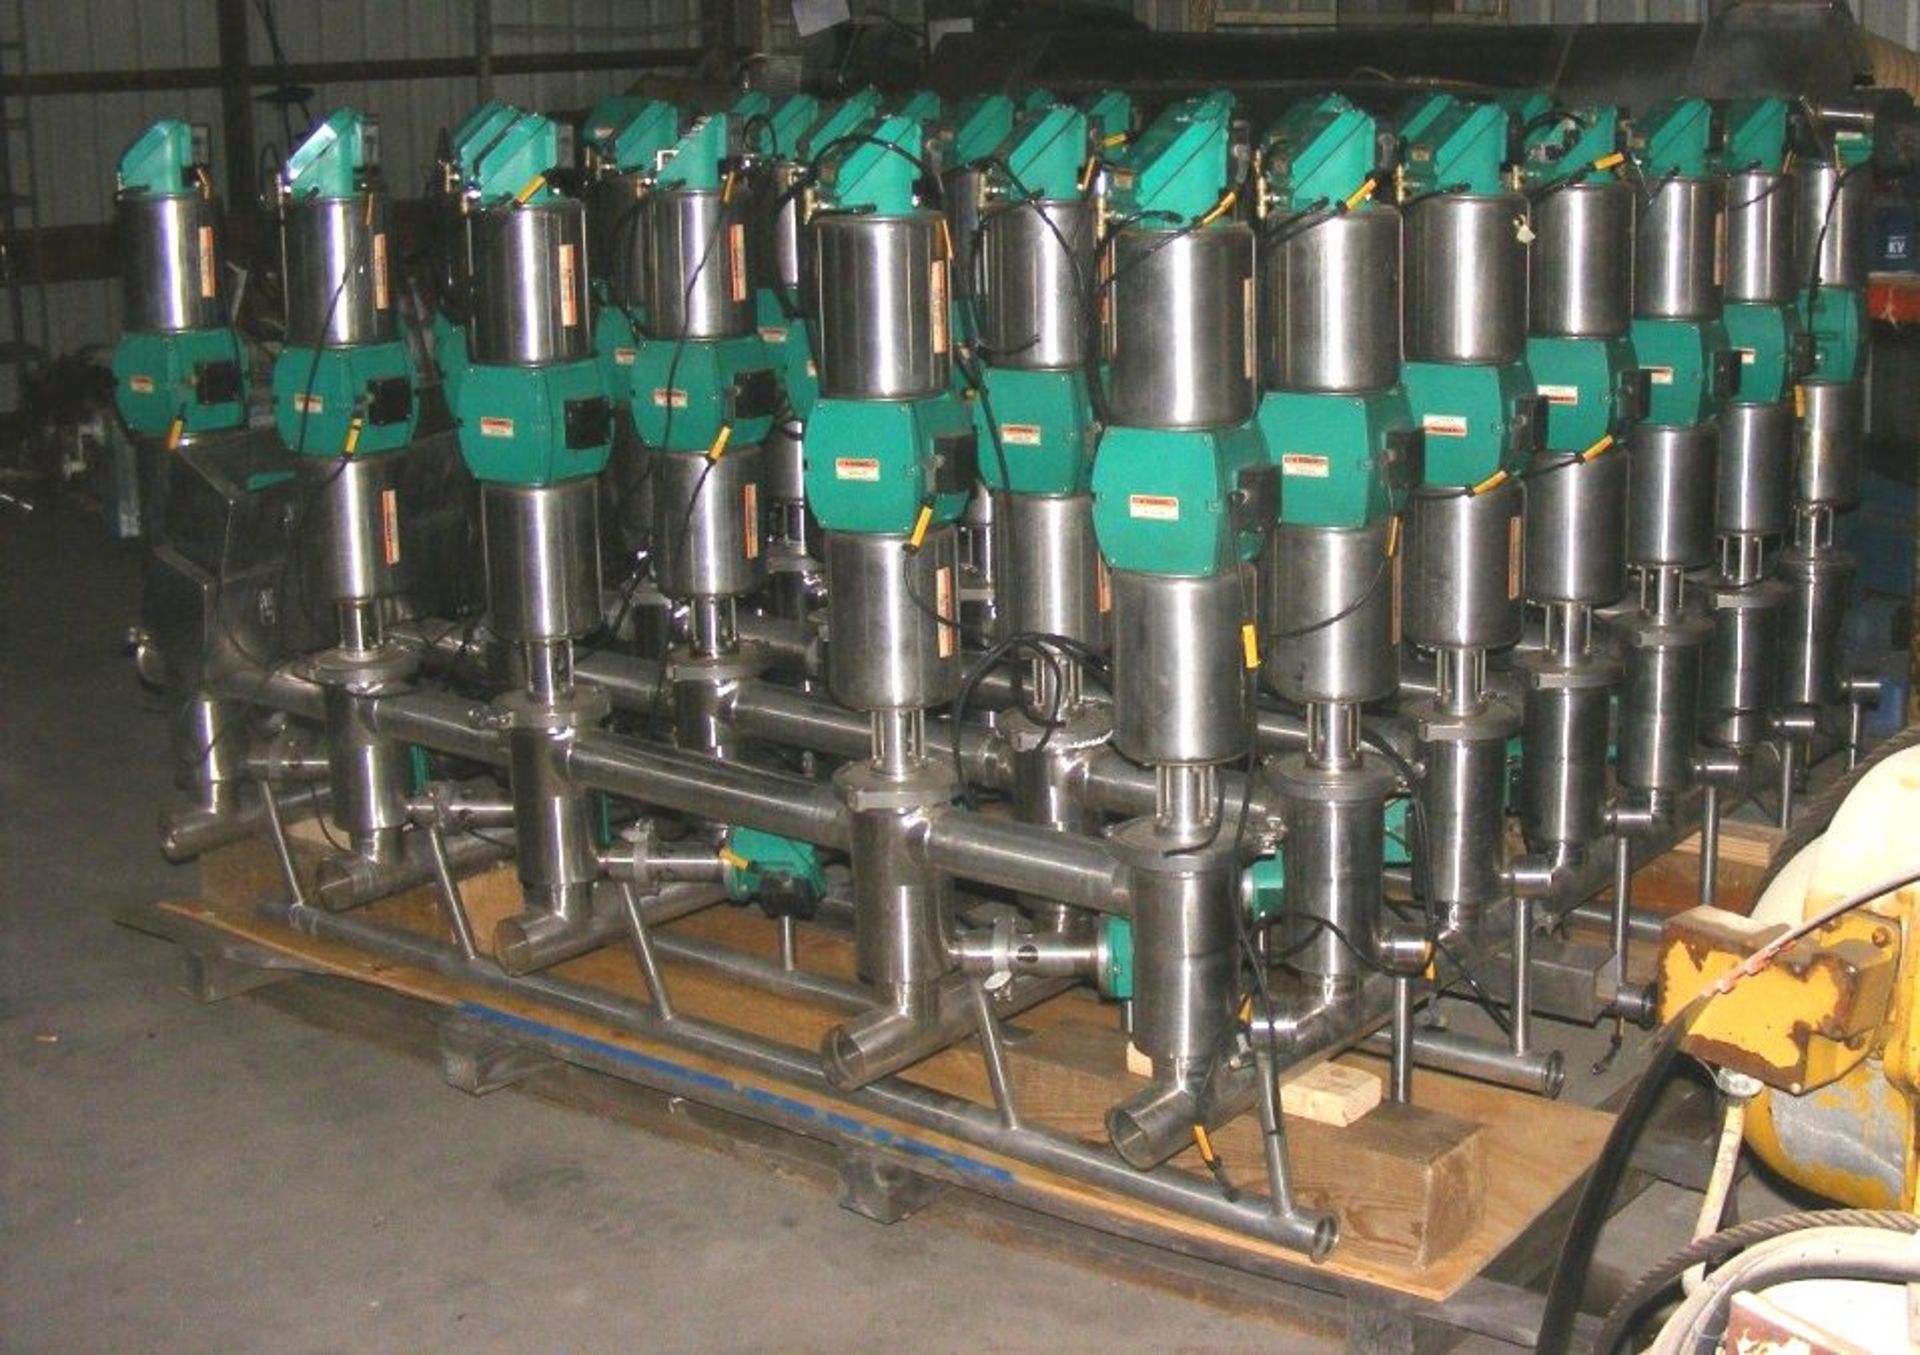 (35) 3" Tri Clover air actuated mix proof sanitary valve manifold cluster model 965. Valve cluster. - Image 5 of 5